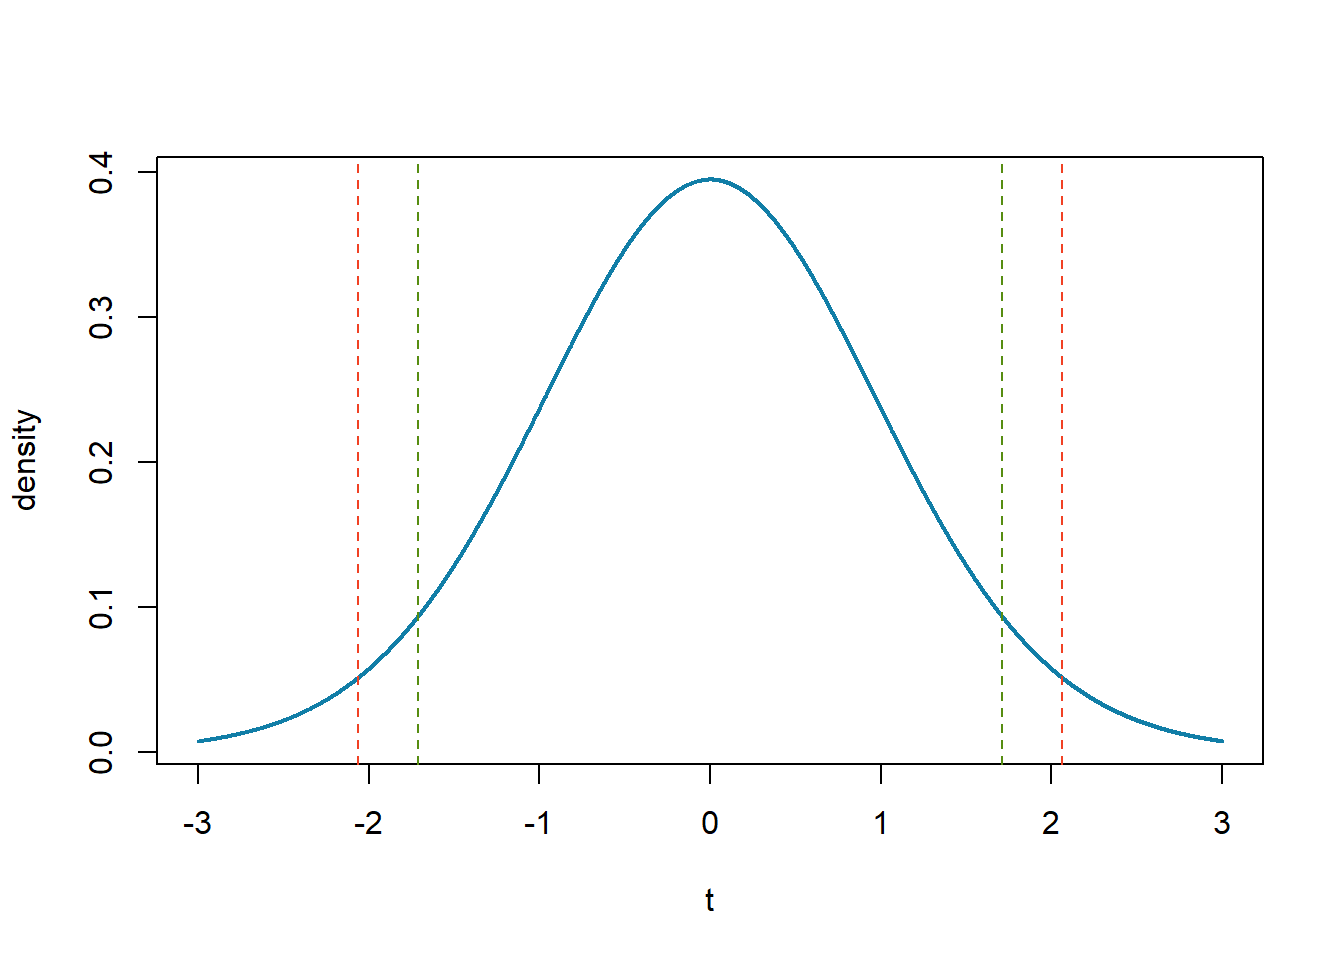 Distribution of *t* scores (with 24 degrees of freedom) when the null hypothesis is true. The red vertical lines represent the two-tailed critical values, and the green vertical lines the one-tailed critical values when α = .05.